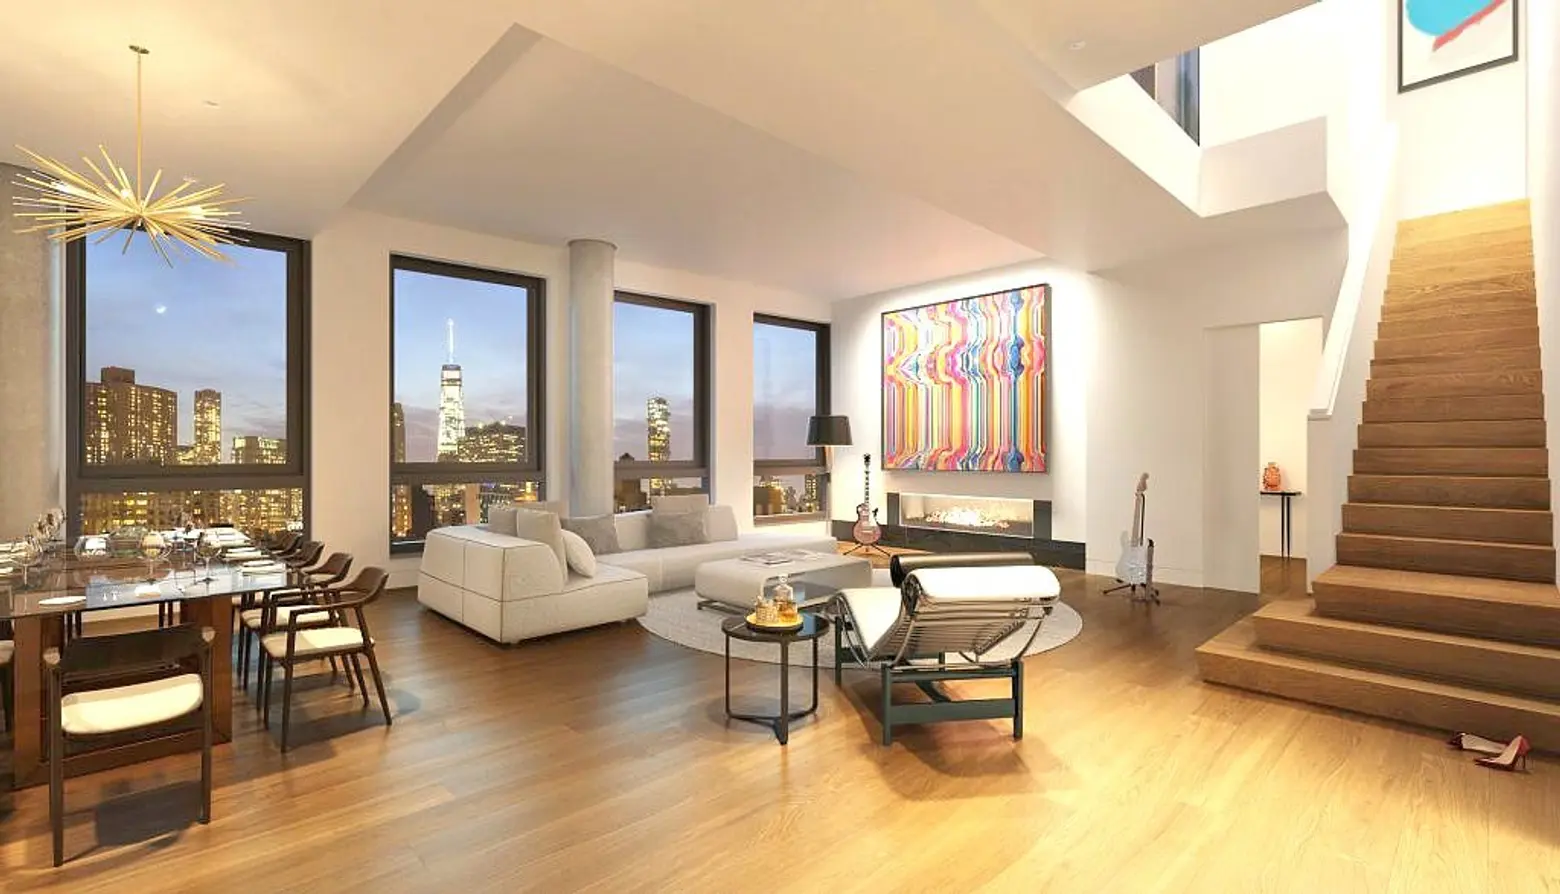 Sales launch with new renderings at 242 Broome Street, Essex Crossing’s first condos